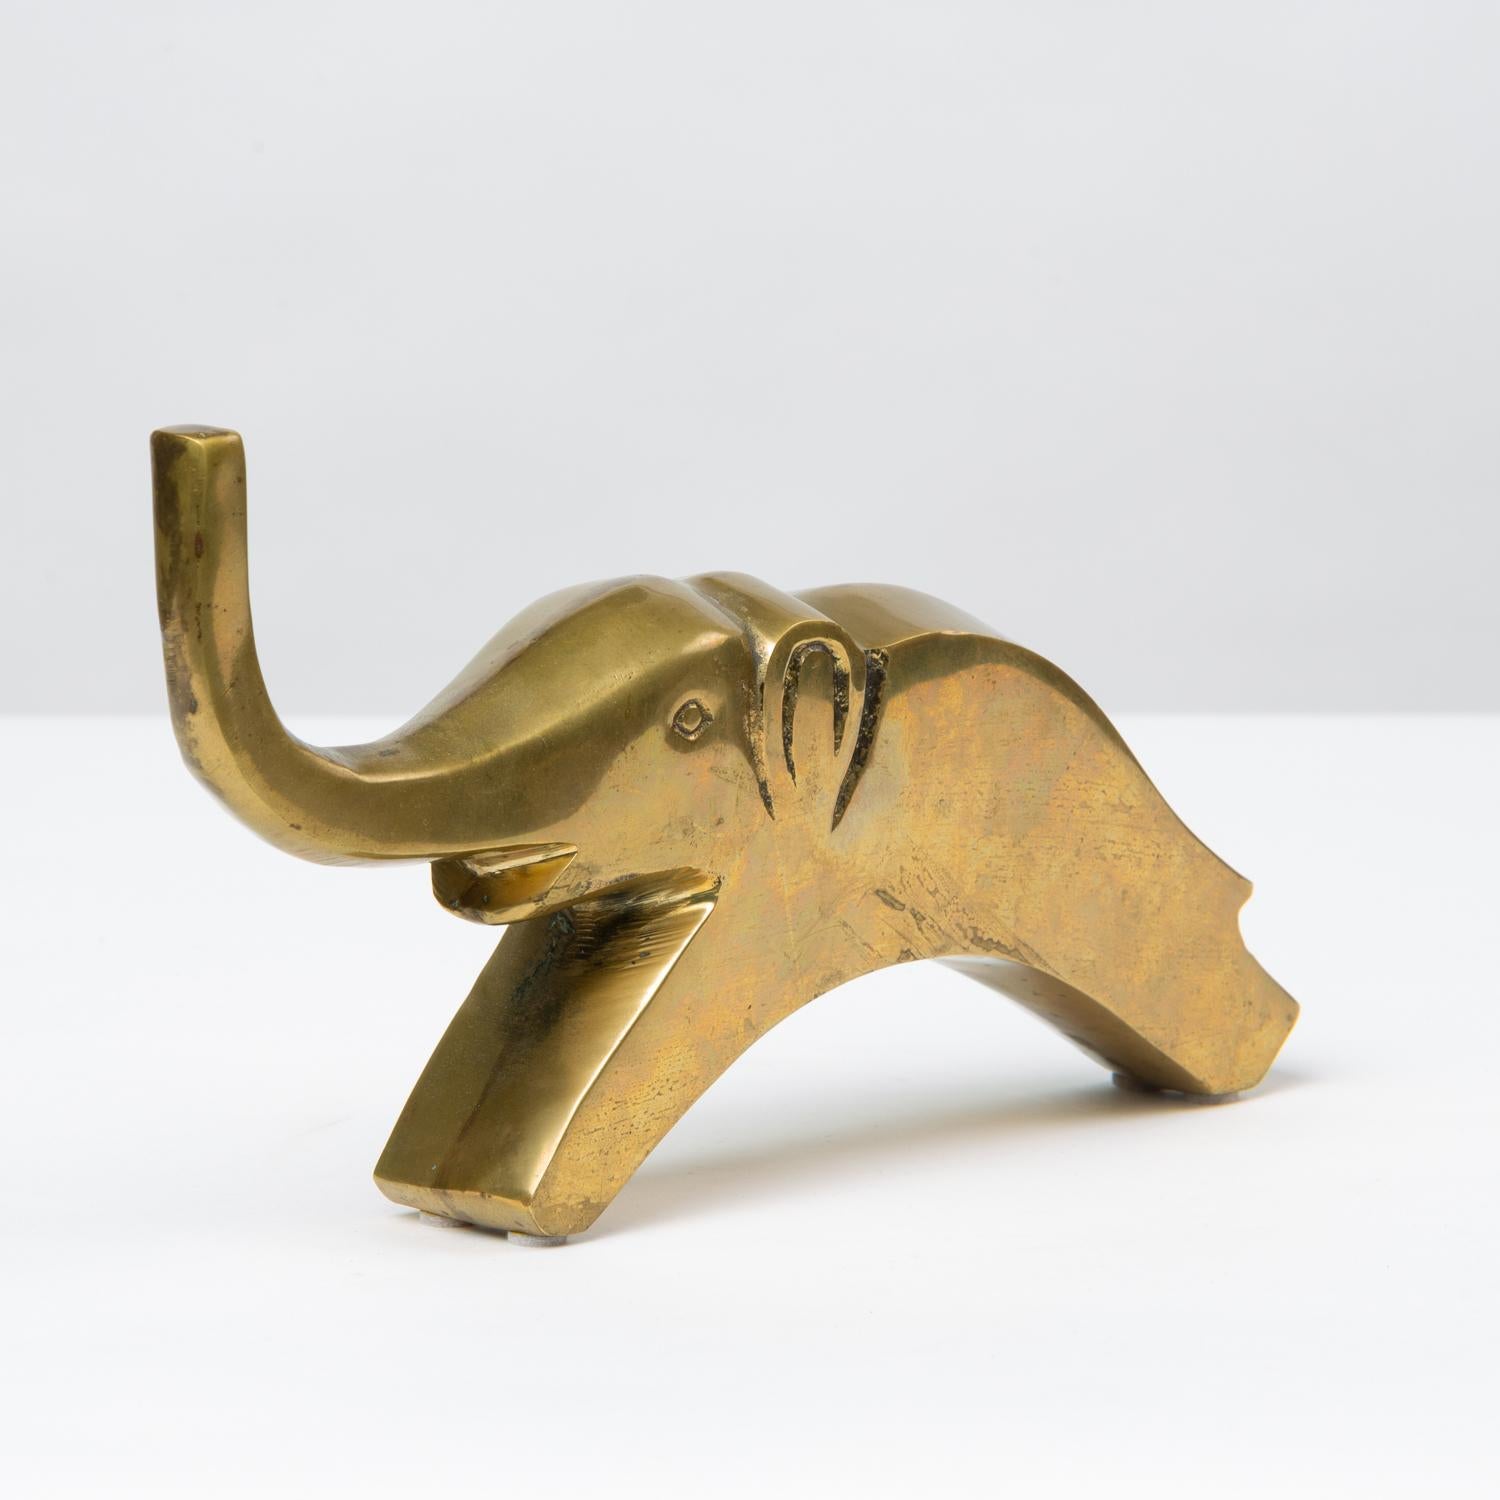 A charming brass paperweight or small sculpture in a modernist rendering of an elephant. The cast brass object has molded ears and eyes, and an upturned trunk. It sits solidly on the front and back “feet.” Unsigned. 

Condition: Excellent vintage